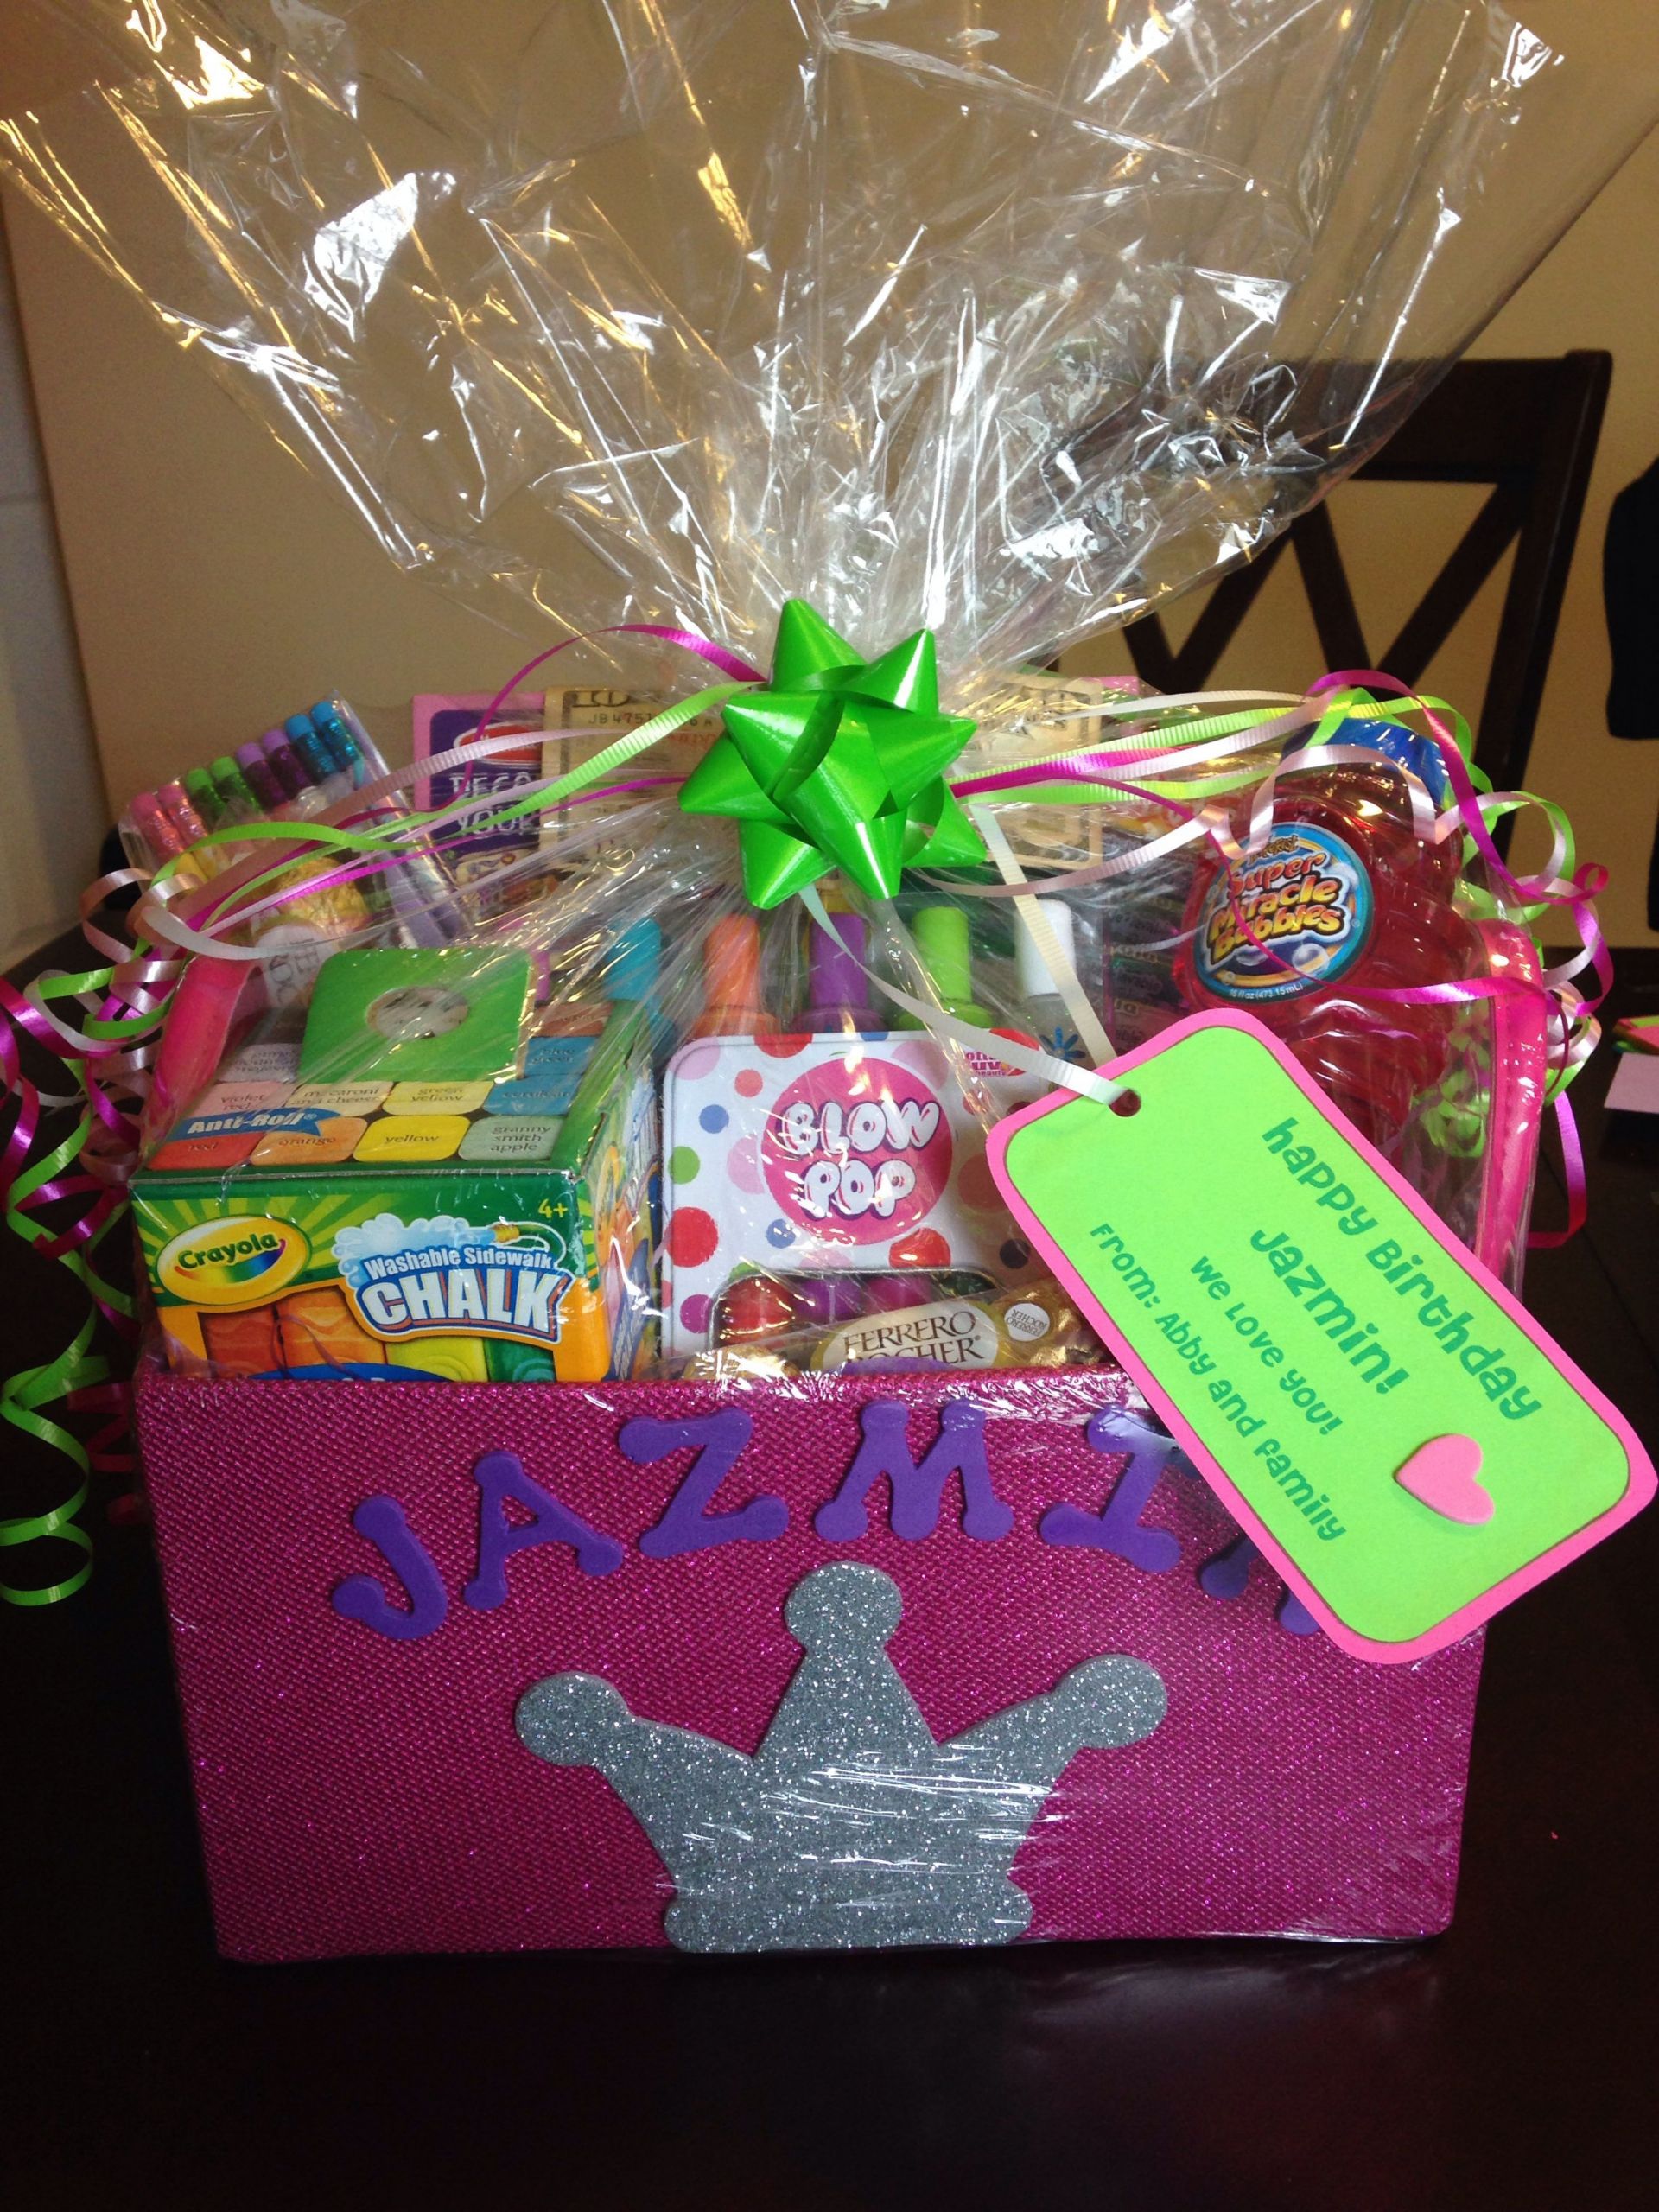 8 Year Old Birthday Gift Ideas
 Gift basket I made for 8 year old girl Gifts